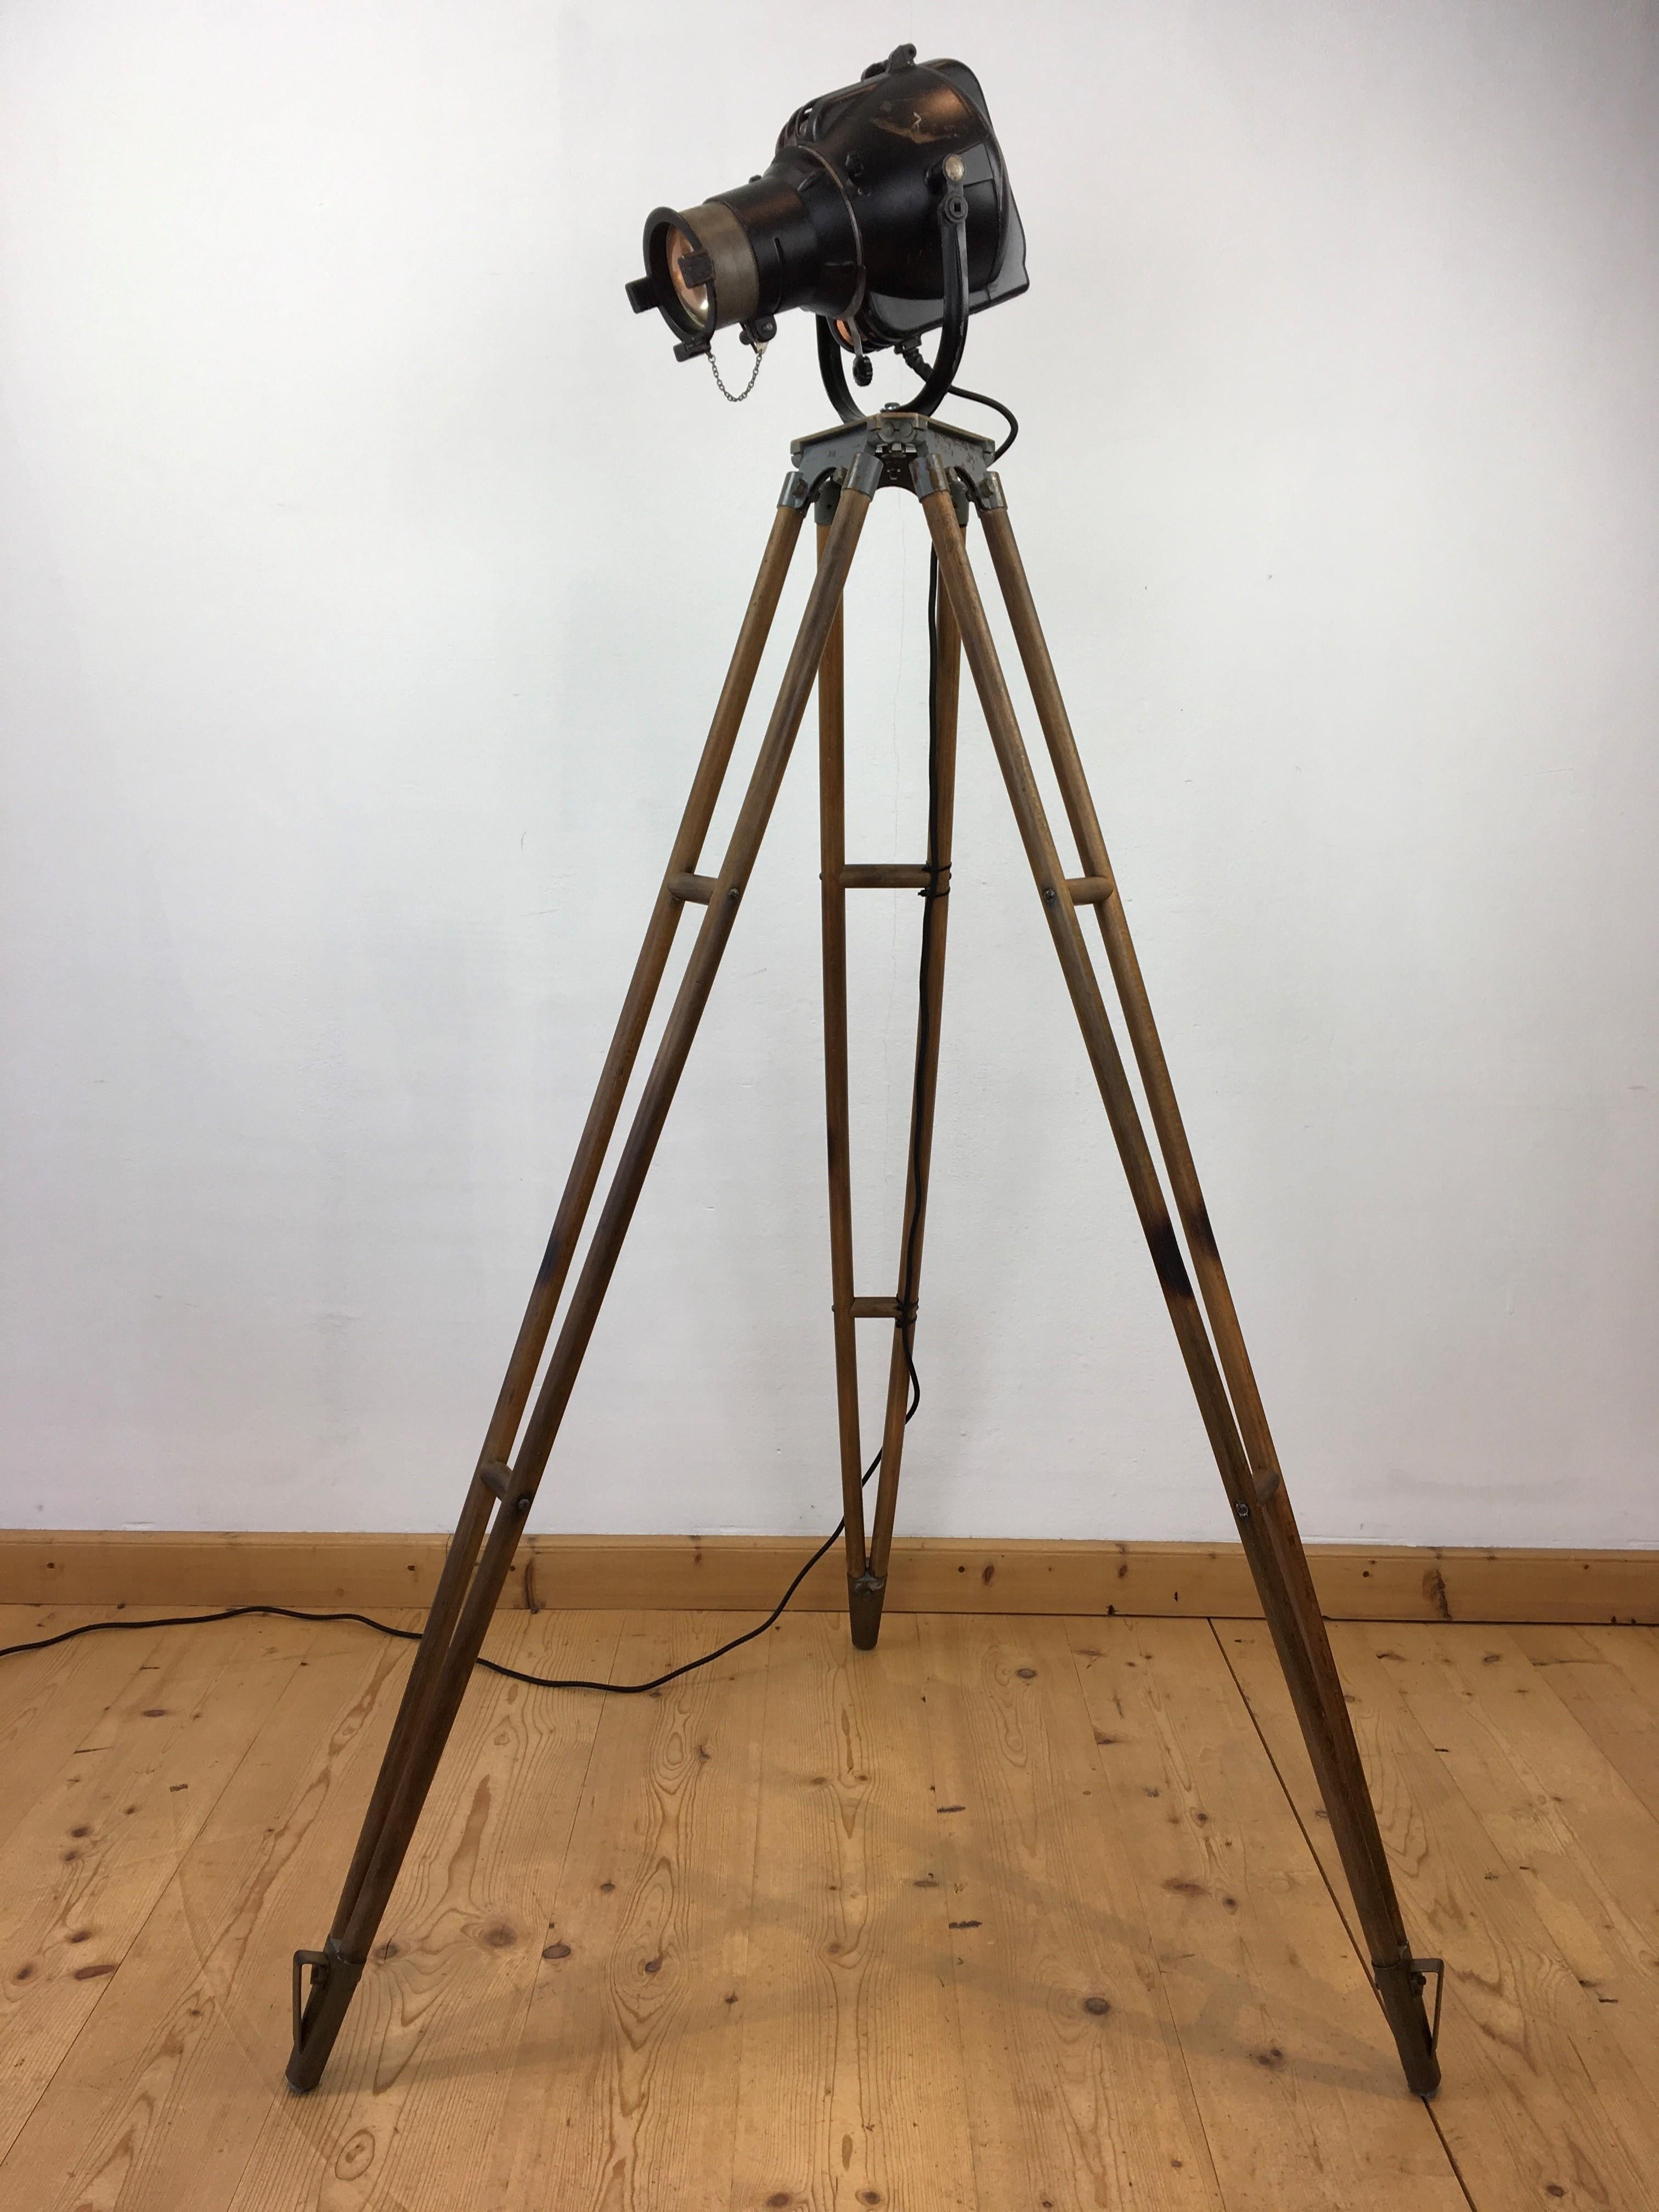 Strand Electric theater spot - stage light on wooden tripod. 
This English spot - theatre projector light was made by Strand Electric Lighting Company and dates 1950 - 1960. 
It's an iconic design!
Strand Electric is an international theatre and